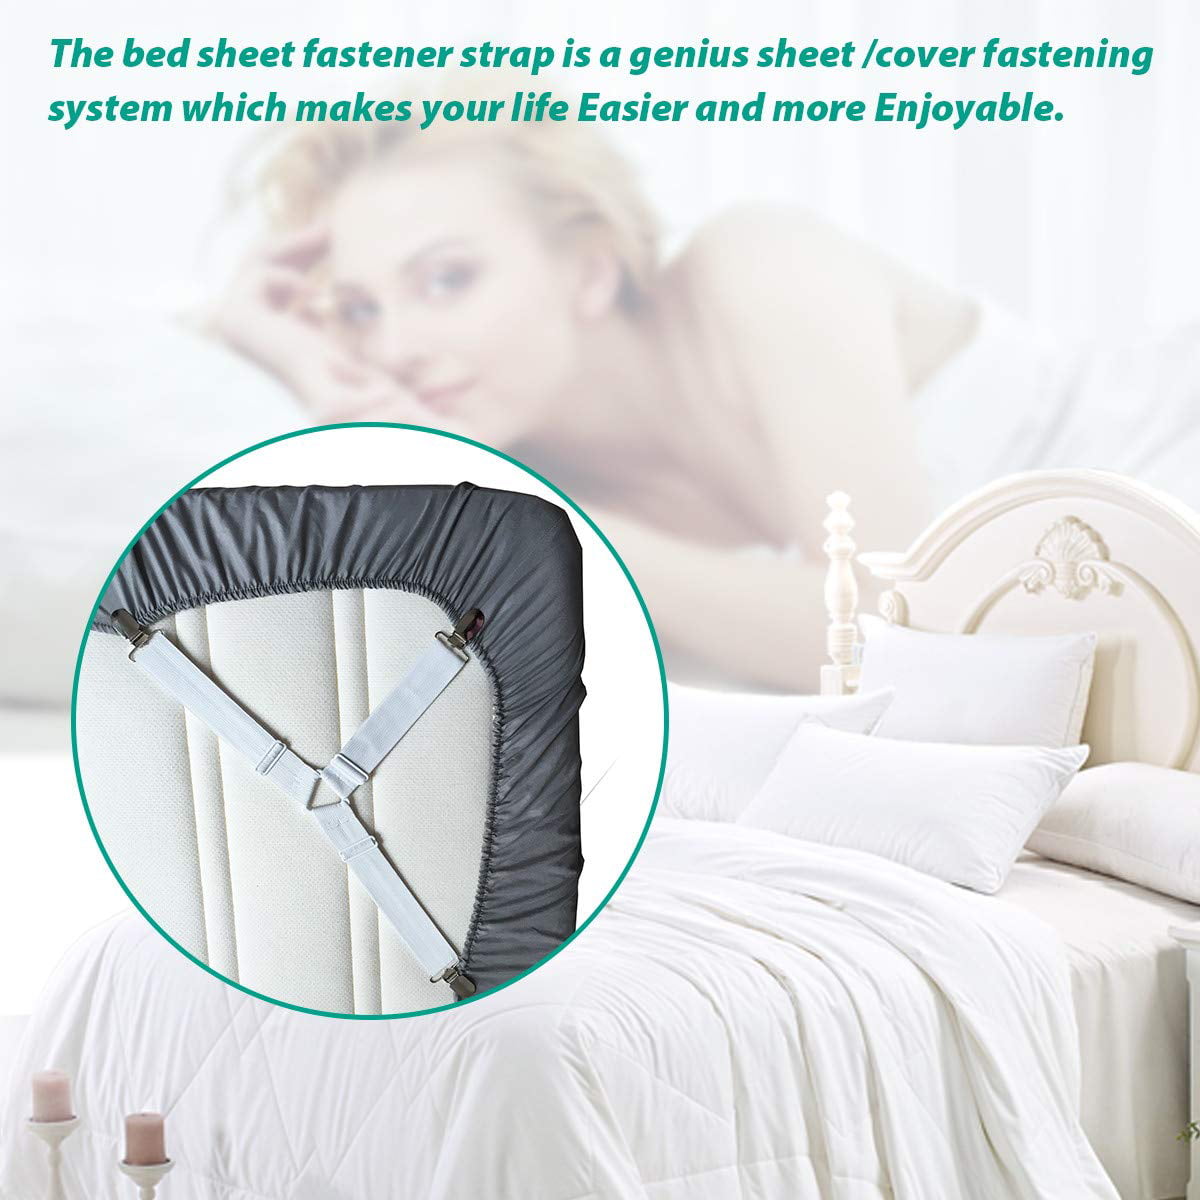 Details about   4Pieces Nolvety Bed Sheet Holder Fastener For Mattress Covers Sofa Cushion